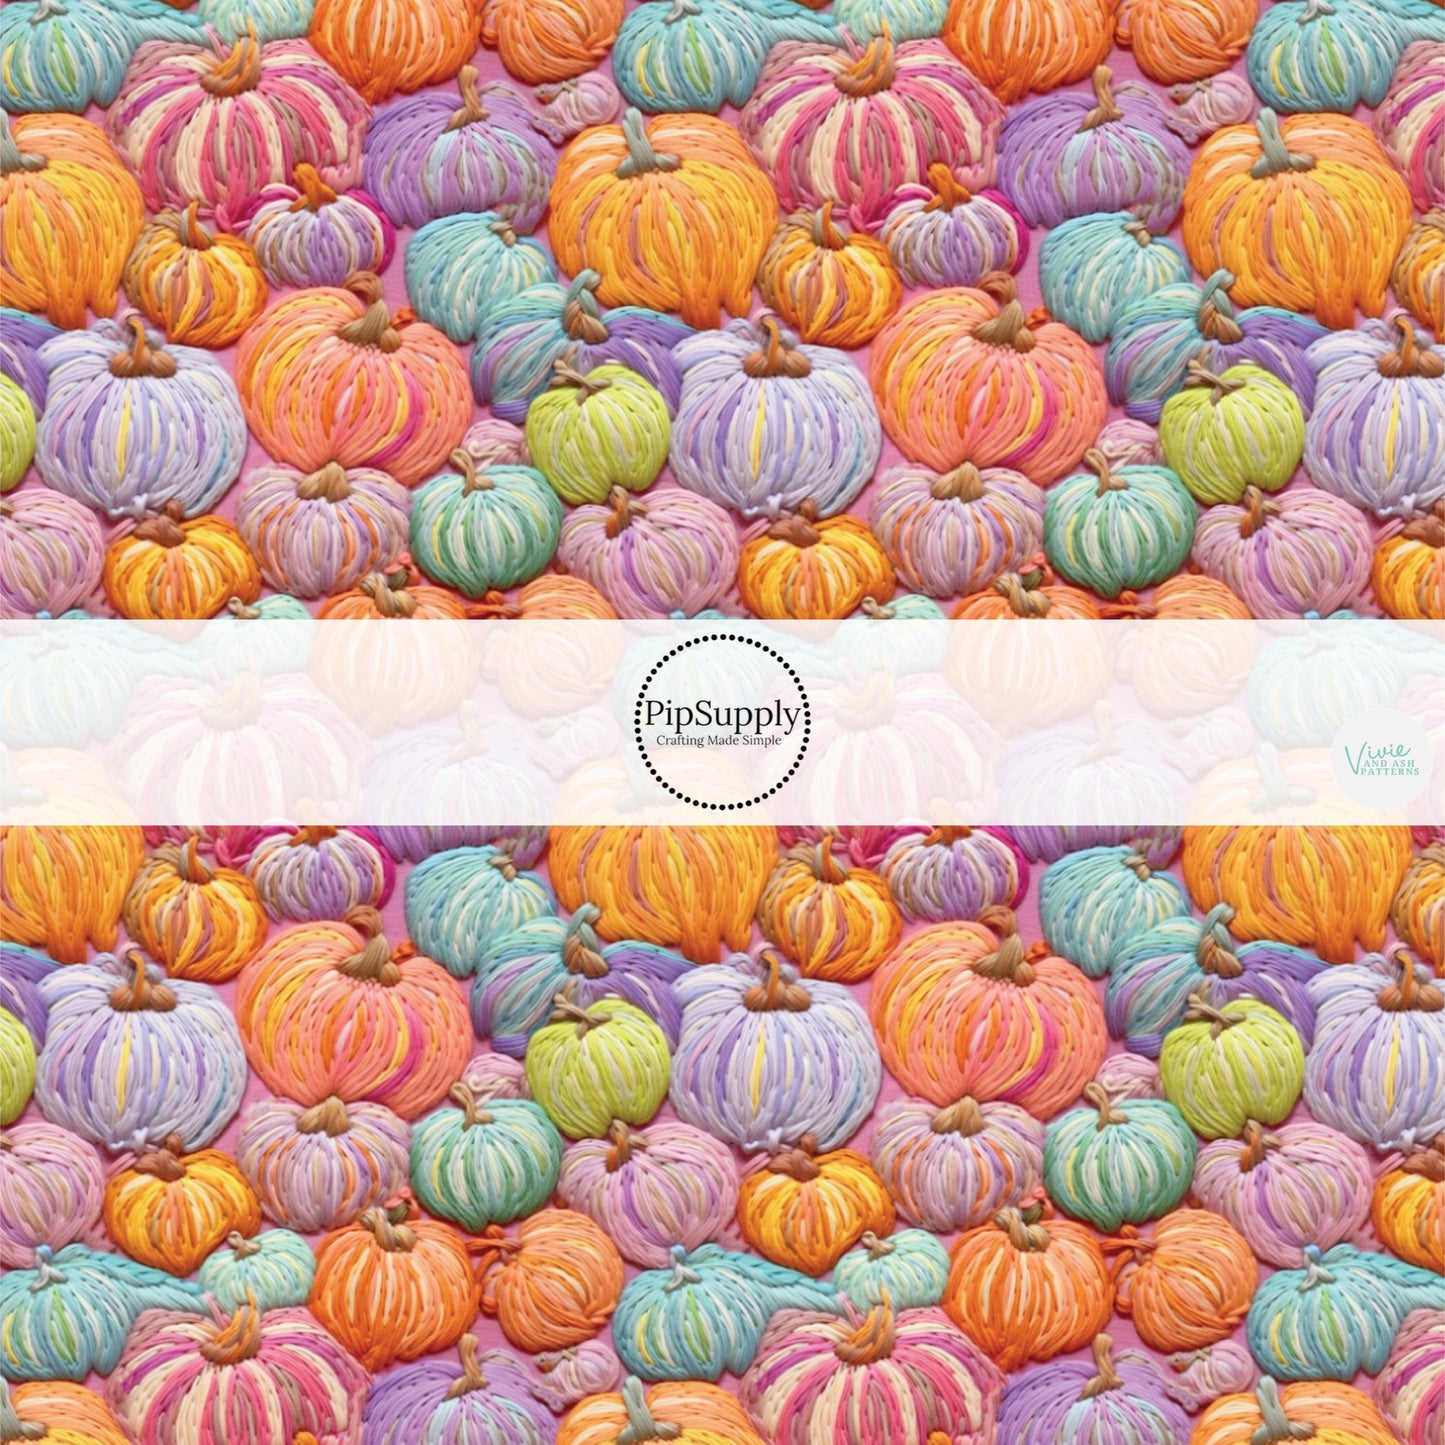 Colorful embroidered pumpkin fabric by the yard.